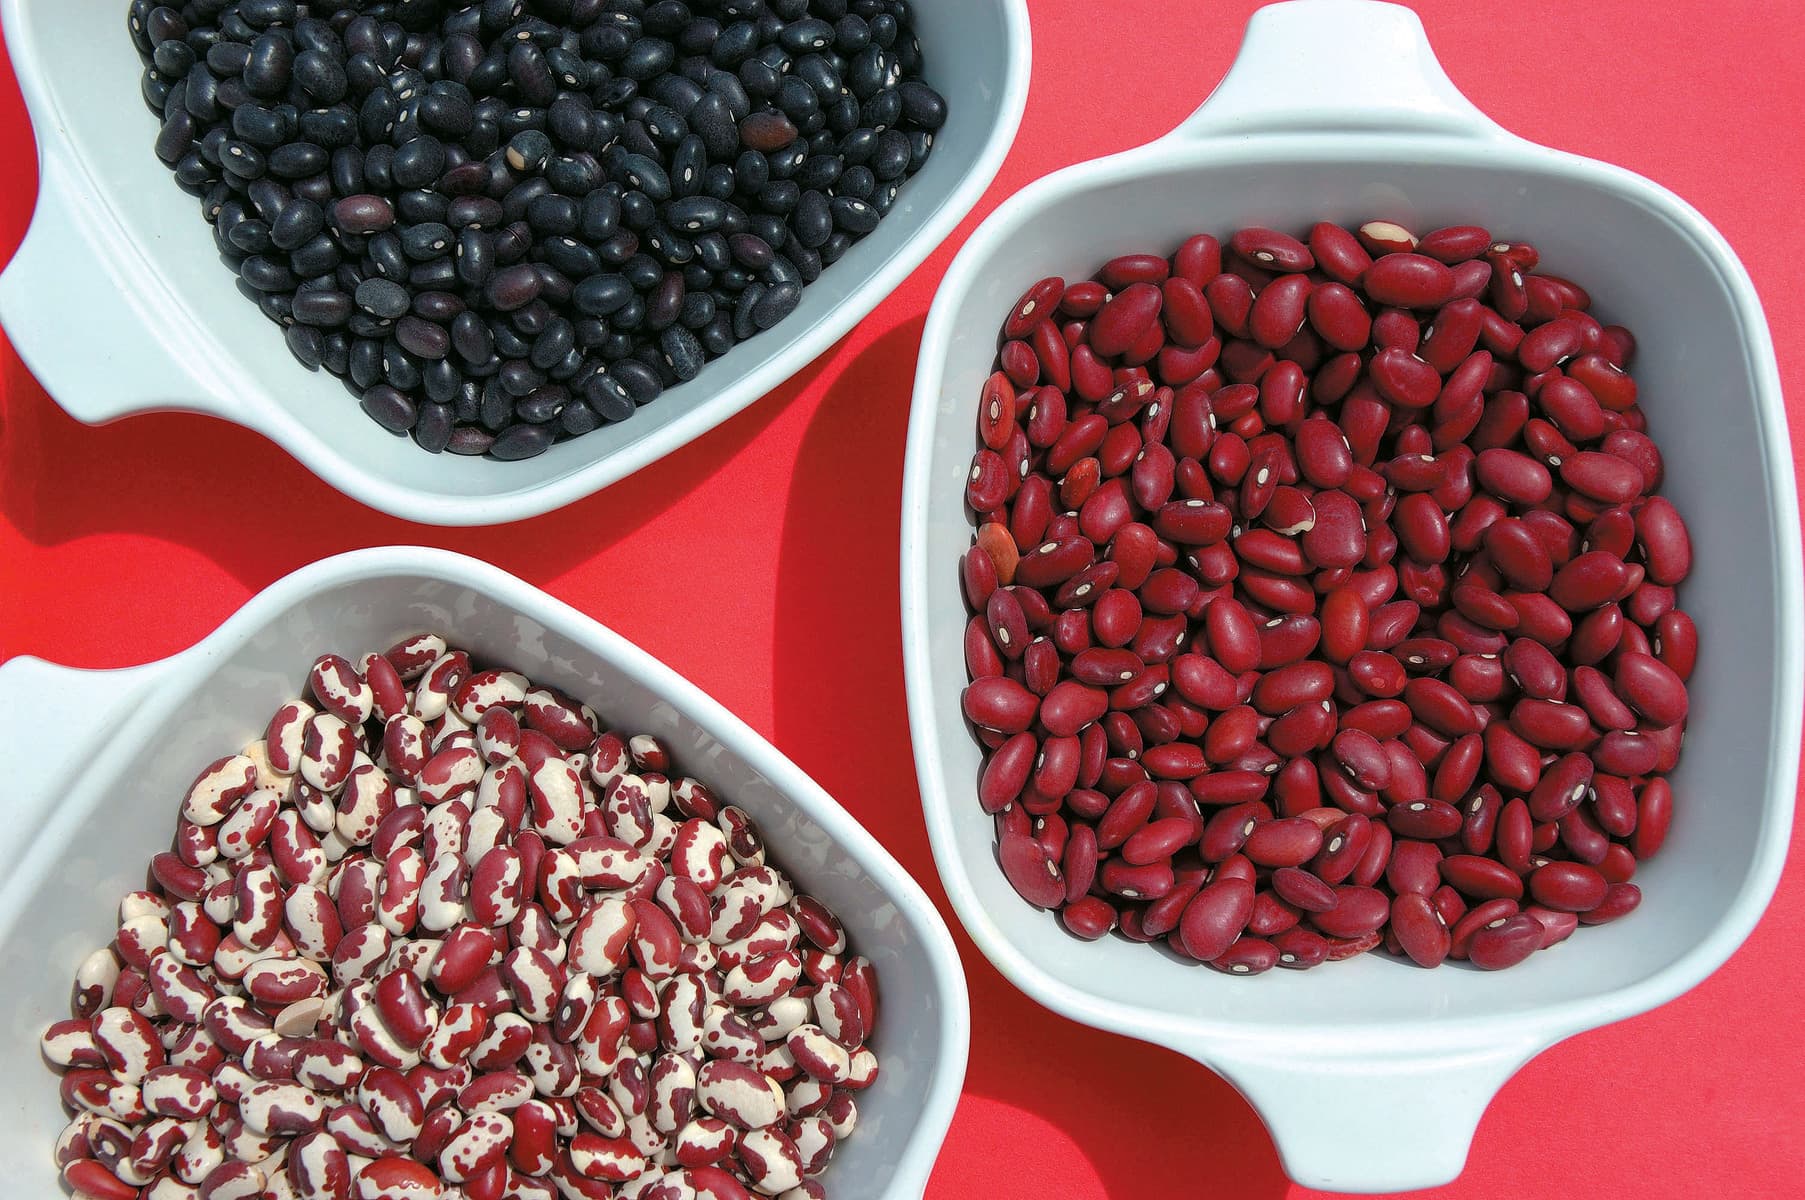 Eat well, spend less: The beginner's guide to beans - Healthy Food Guide